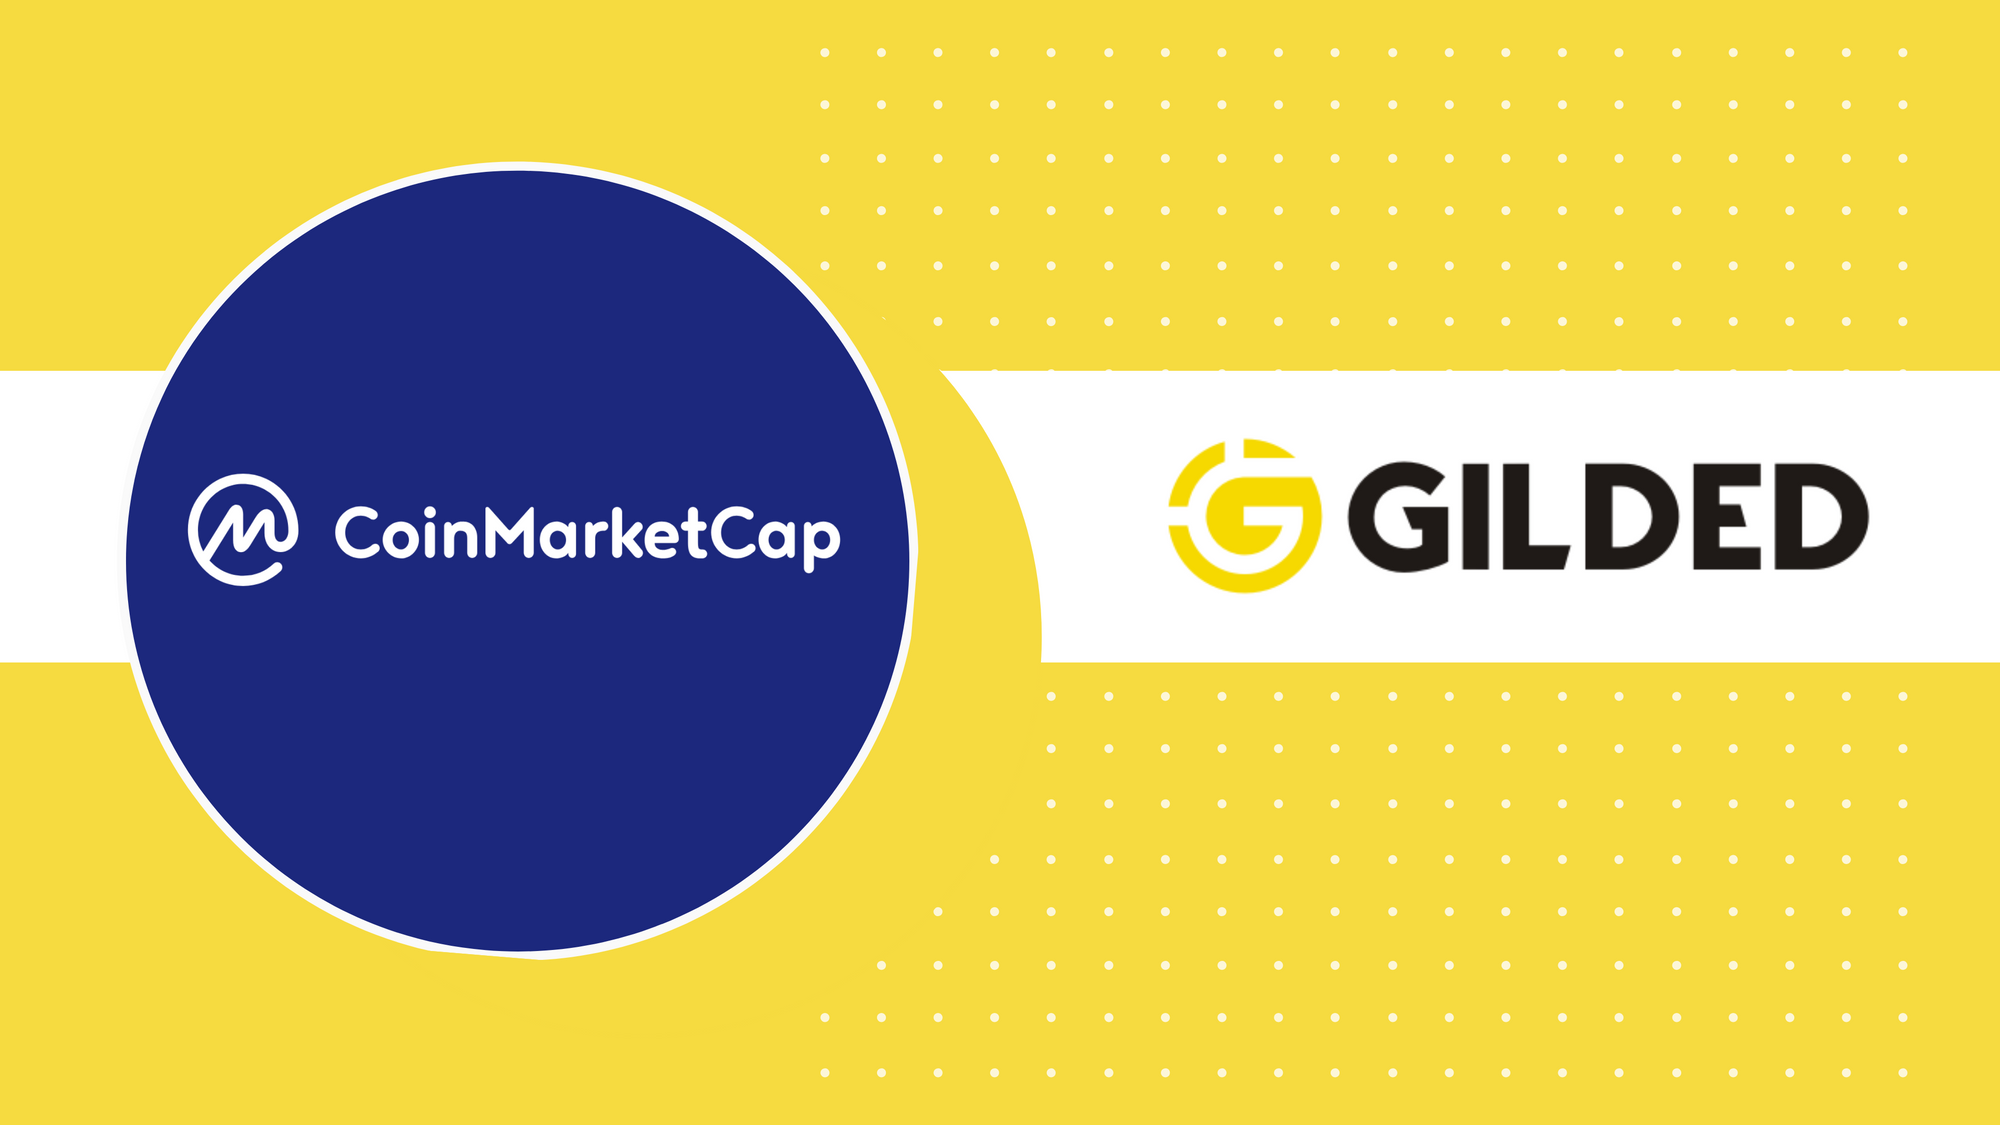 Gilded Puts CoinMarketCap's Digital Currency Payments on Autopilot